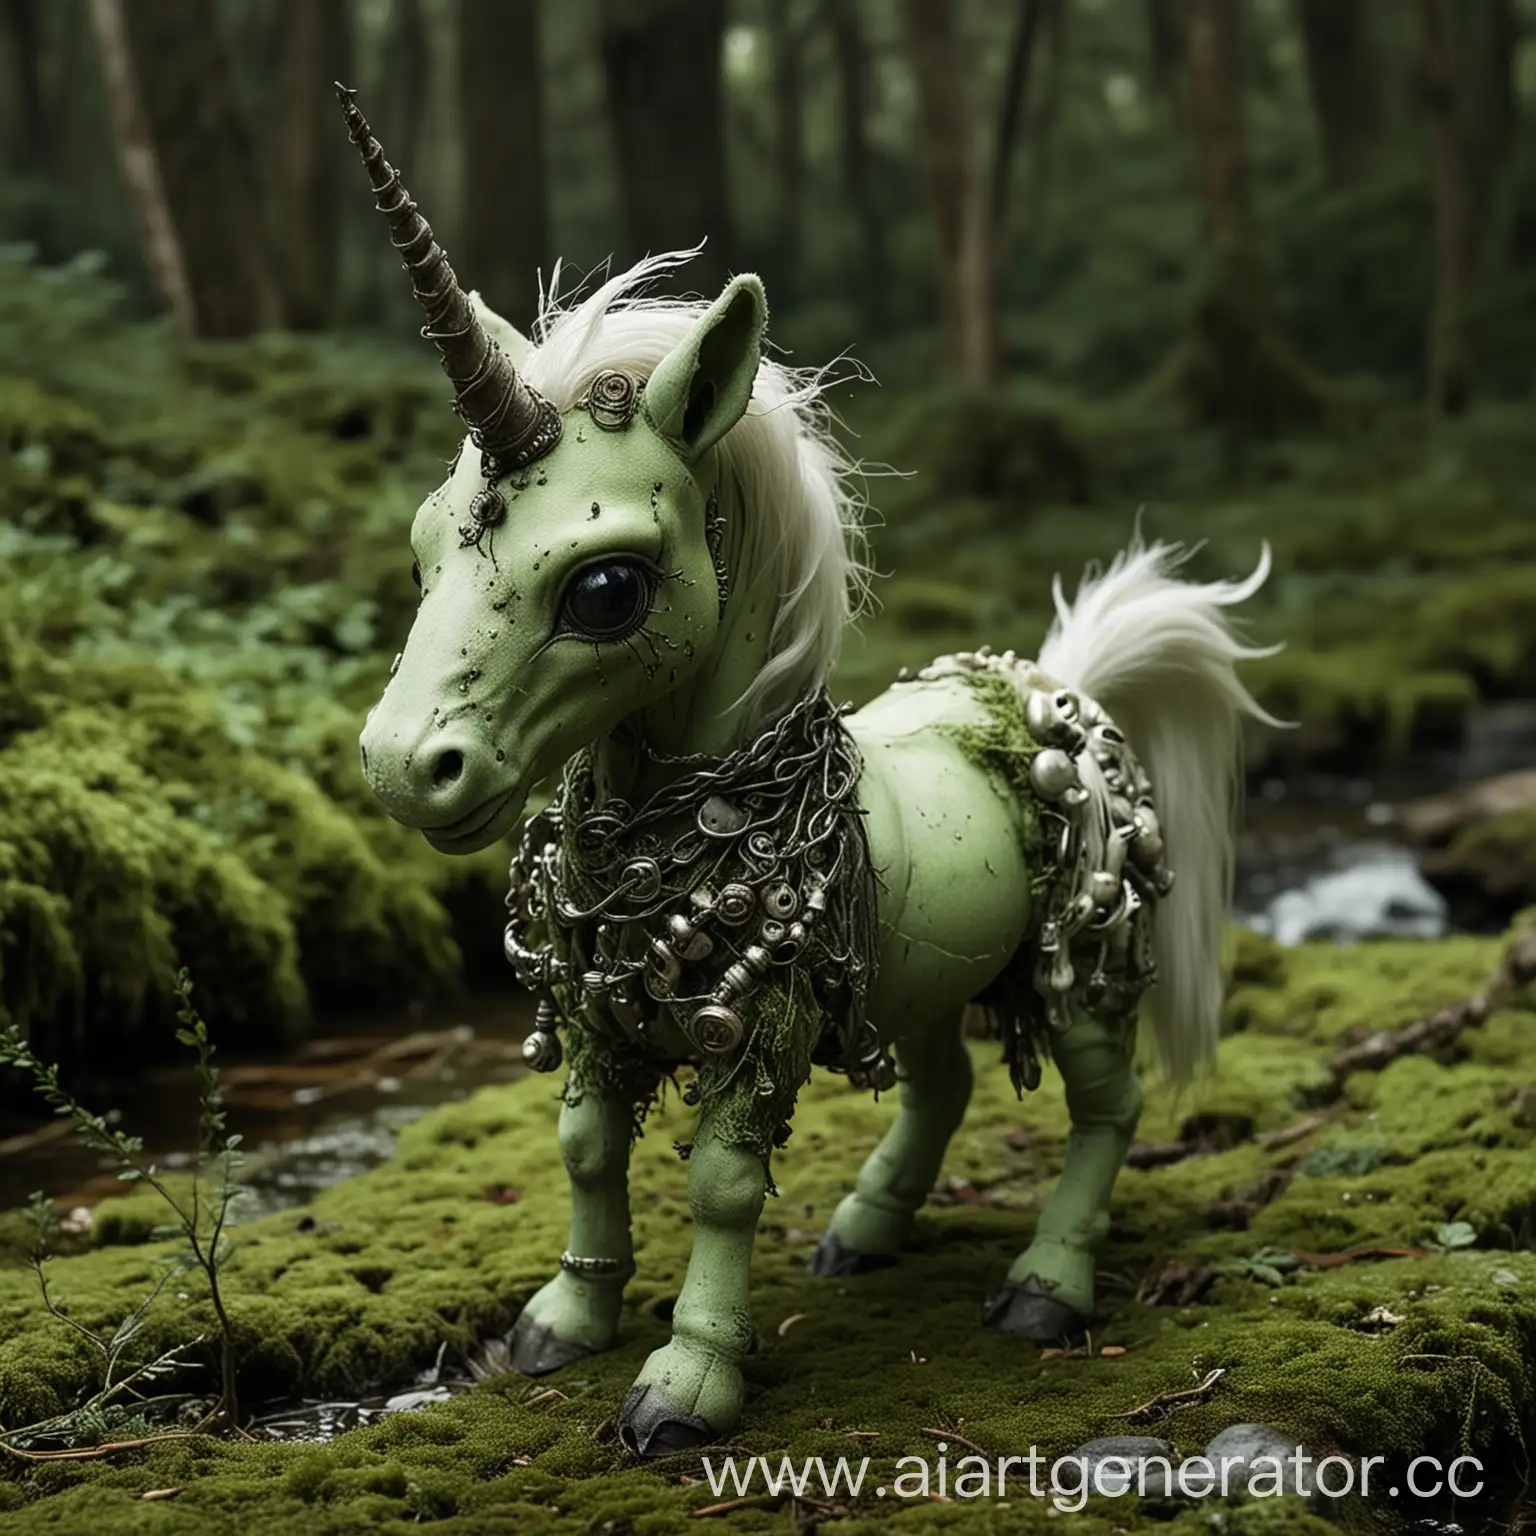 a unique creature that combines features of a plushie and a cursed unicorn. The creature possesses small, dark buttons on its elbows, a default coloration like that of a river, and limp seaweed draped over its neck and tail. Some notable characteristics include seam lines, a glowing lantern and chains on its horn, and a "hollow" torso revealing bones, suggesting possible injury or decay. The green, moss-covered or rotten flesh hints at its prolonged existence in a swamp. This creature exhibits doll-like movements due to its wooden joints.